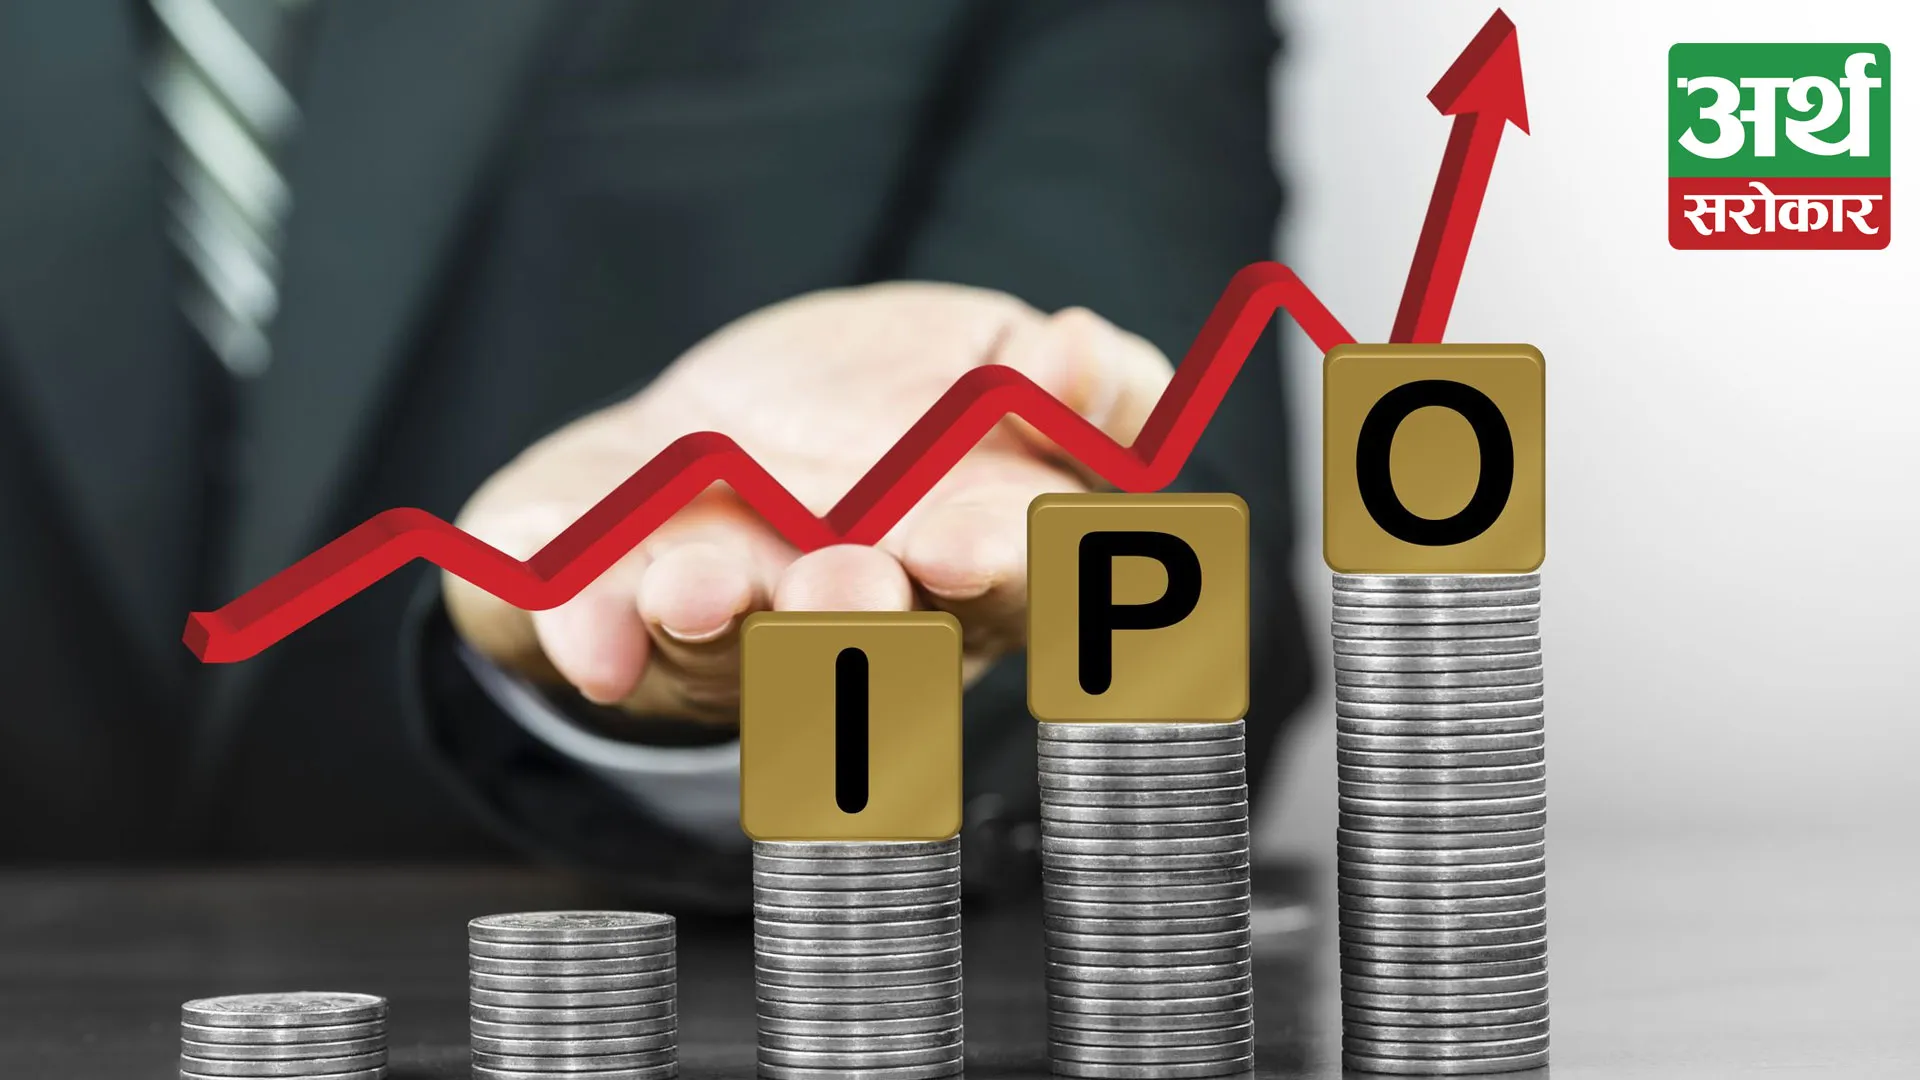 Purwanchal Lube Oil is going to issue an IPO